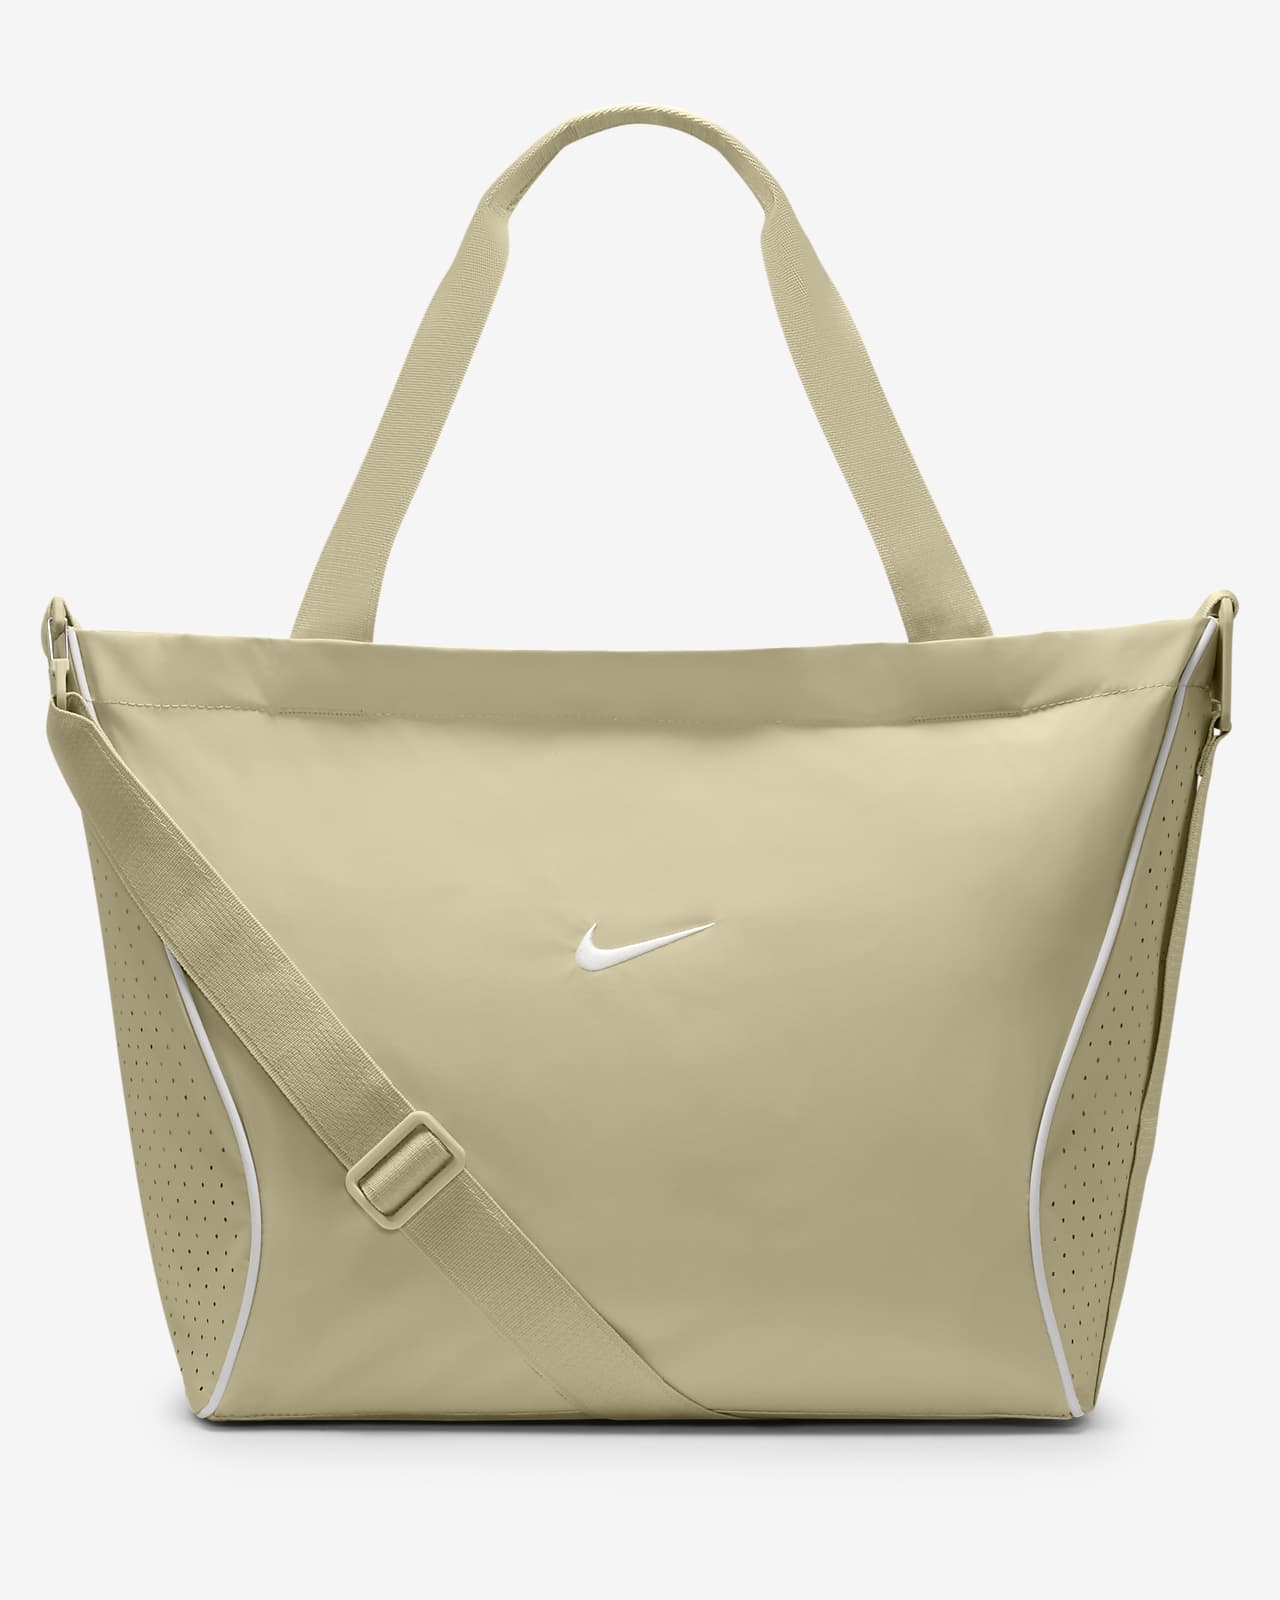 Nike unisex Sportswear Essentials sling bag (8l) in brown | ASOS-cokhiquangminh.vn